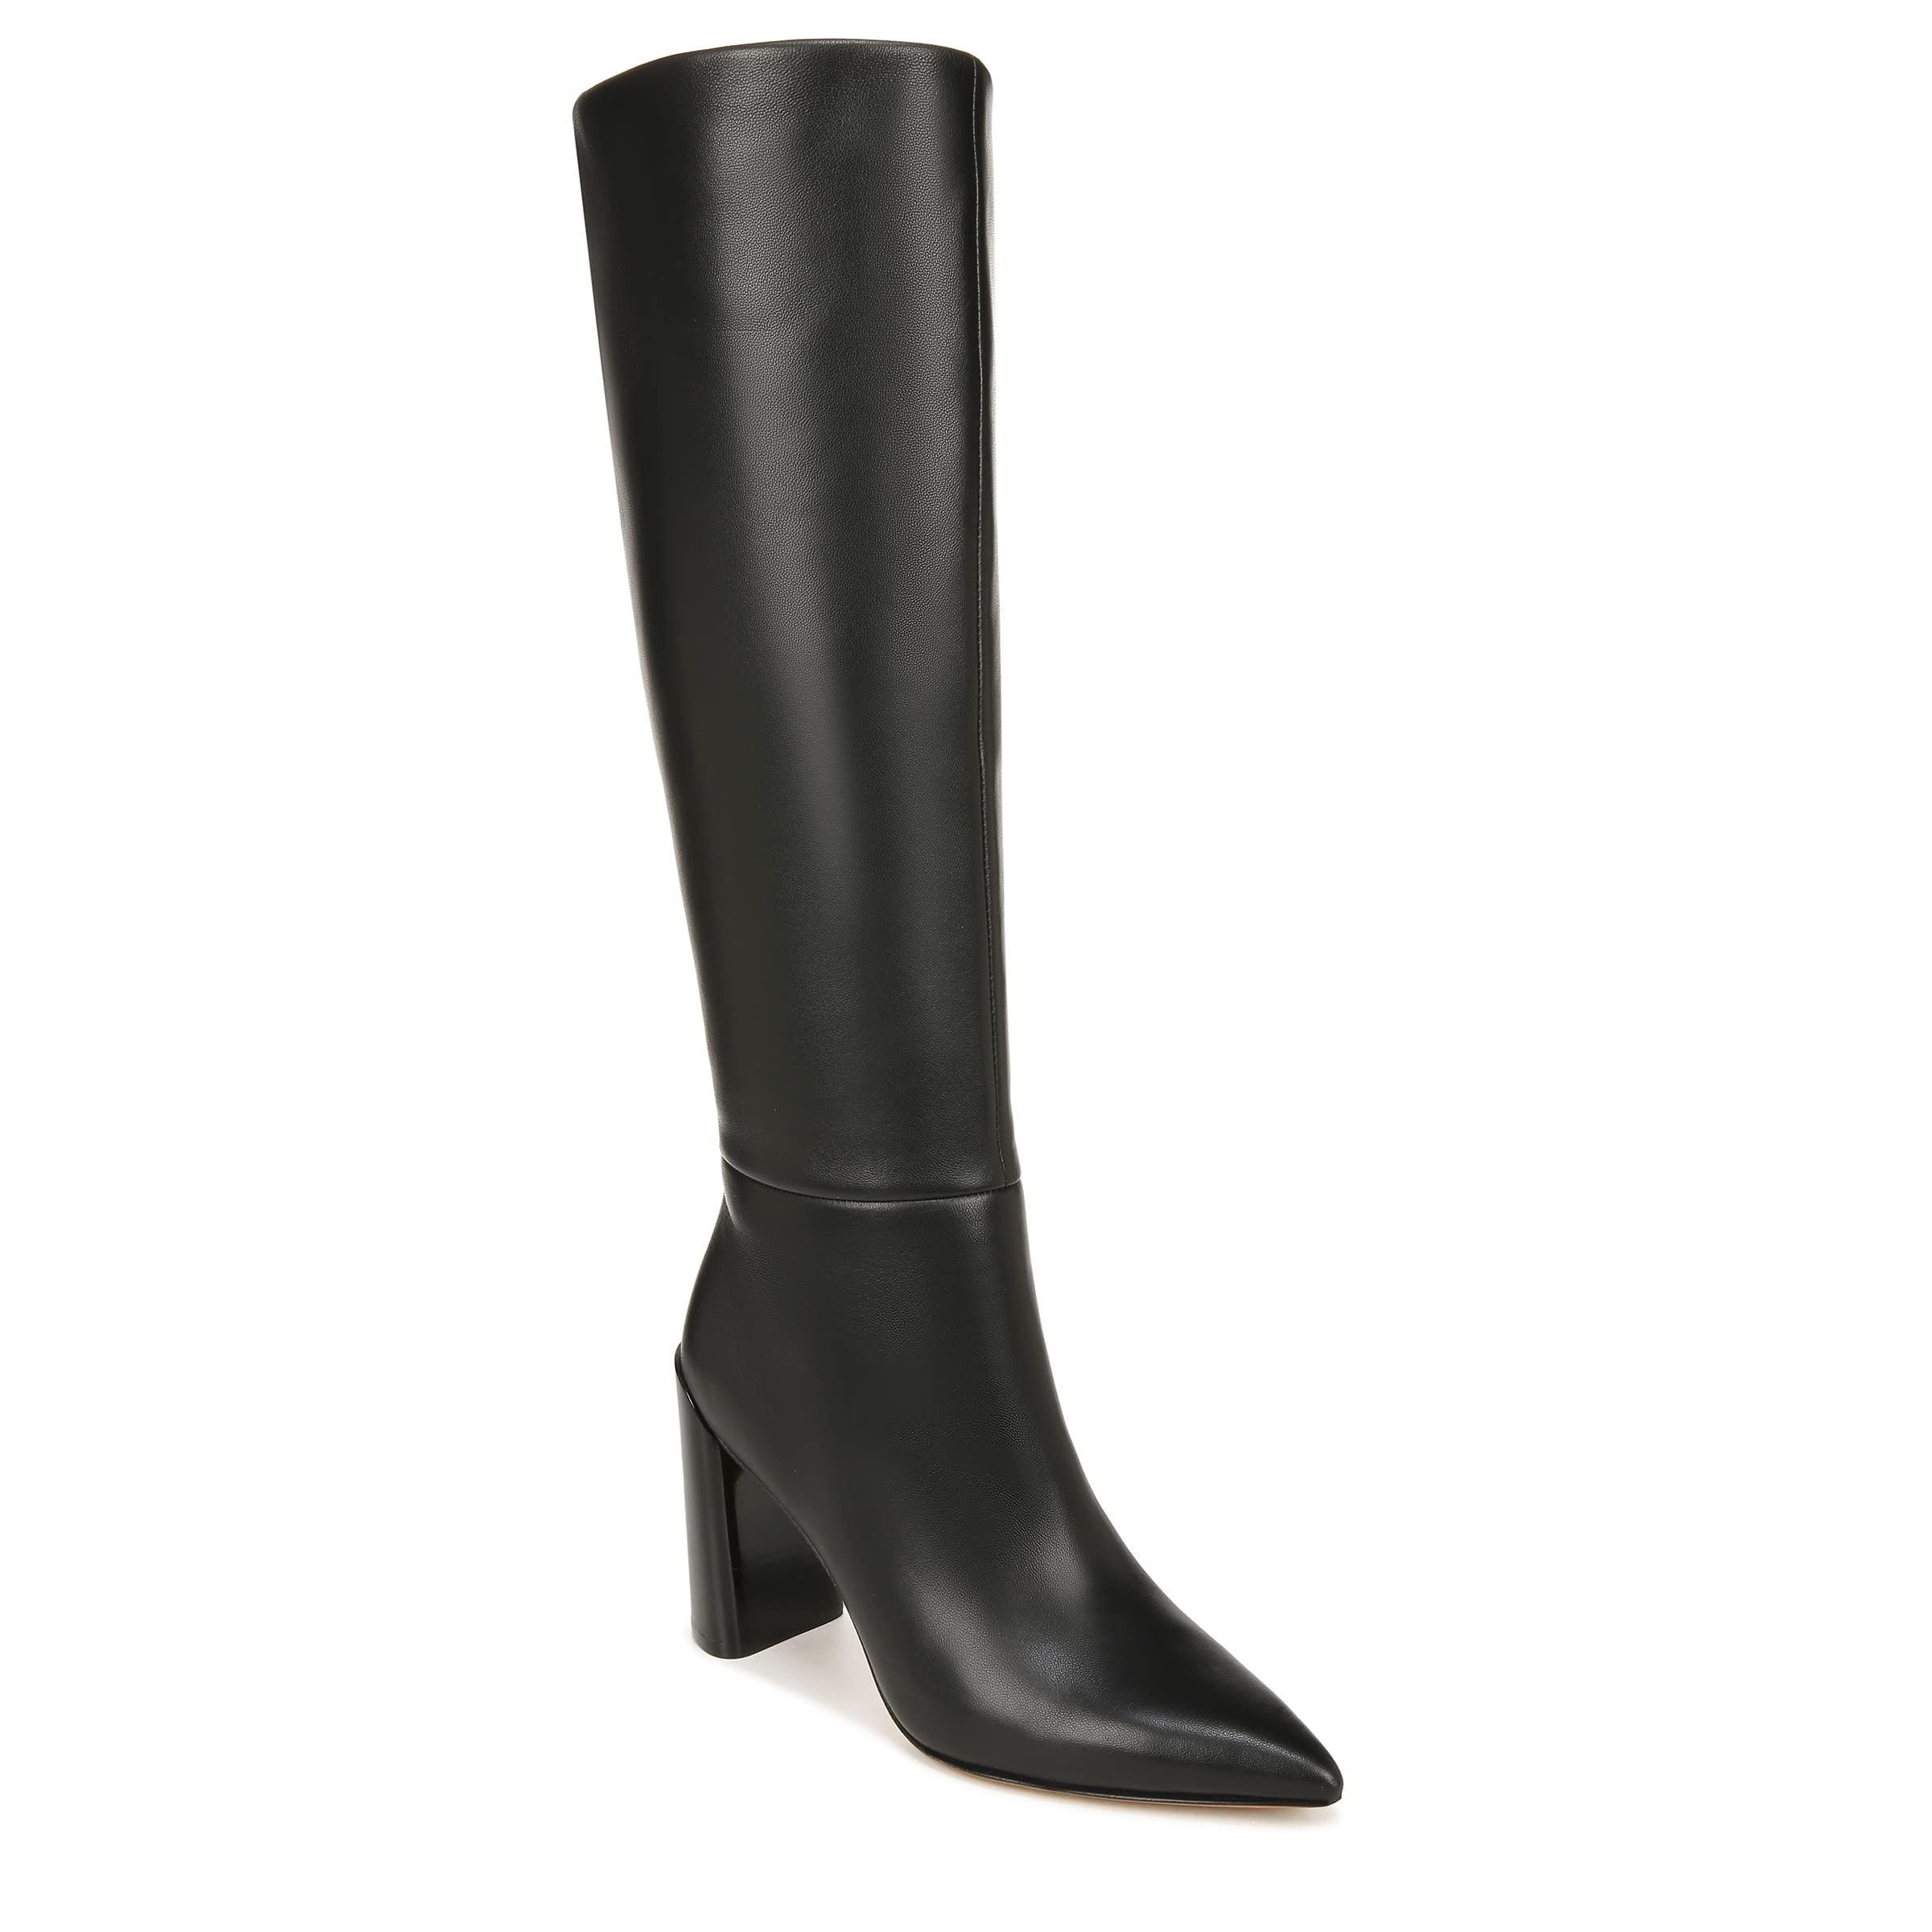 Vince Pilar Knee High Boots in Black | Lyst